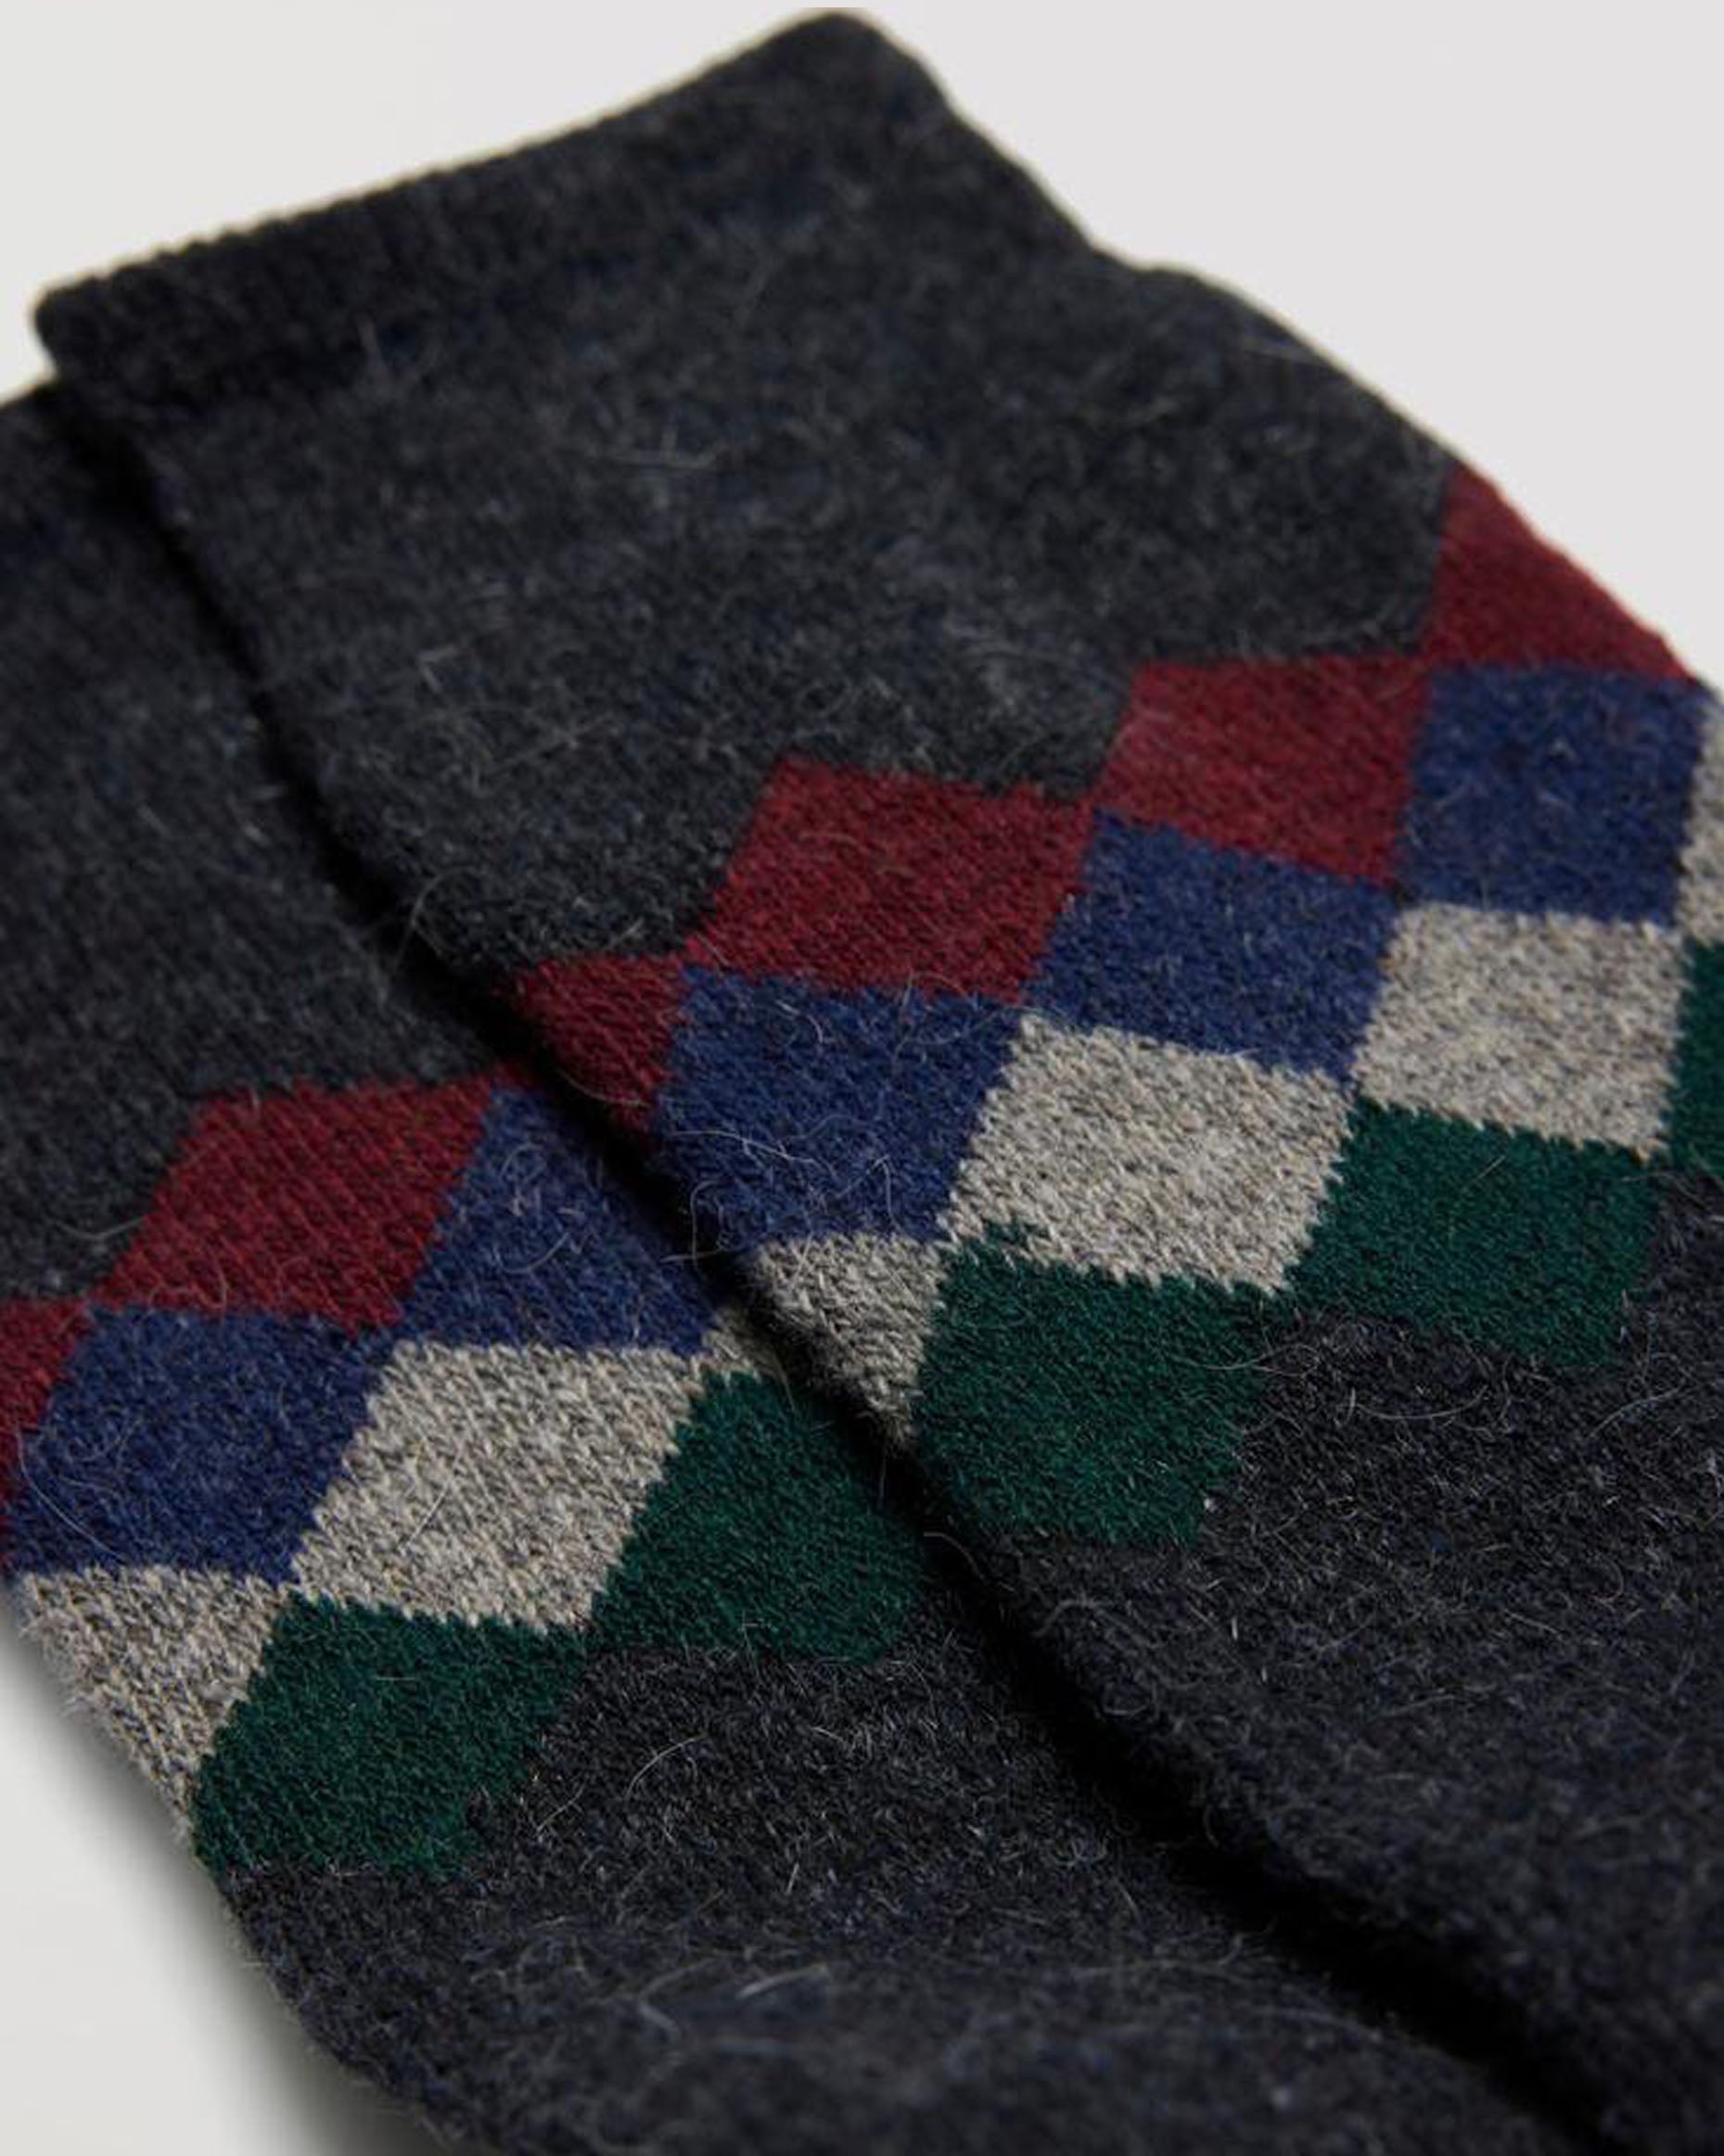 Ysabel Mora 22891 Diamond Angora Socks - Dark grey chunky knitted warm and cosy angora mix thermal men's socks with a diamond pattern in maroon, navy blue, light grey and dark green around the ankle and deep comfort cuff.